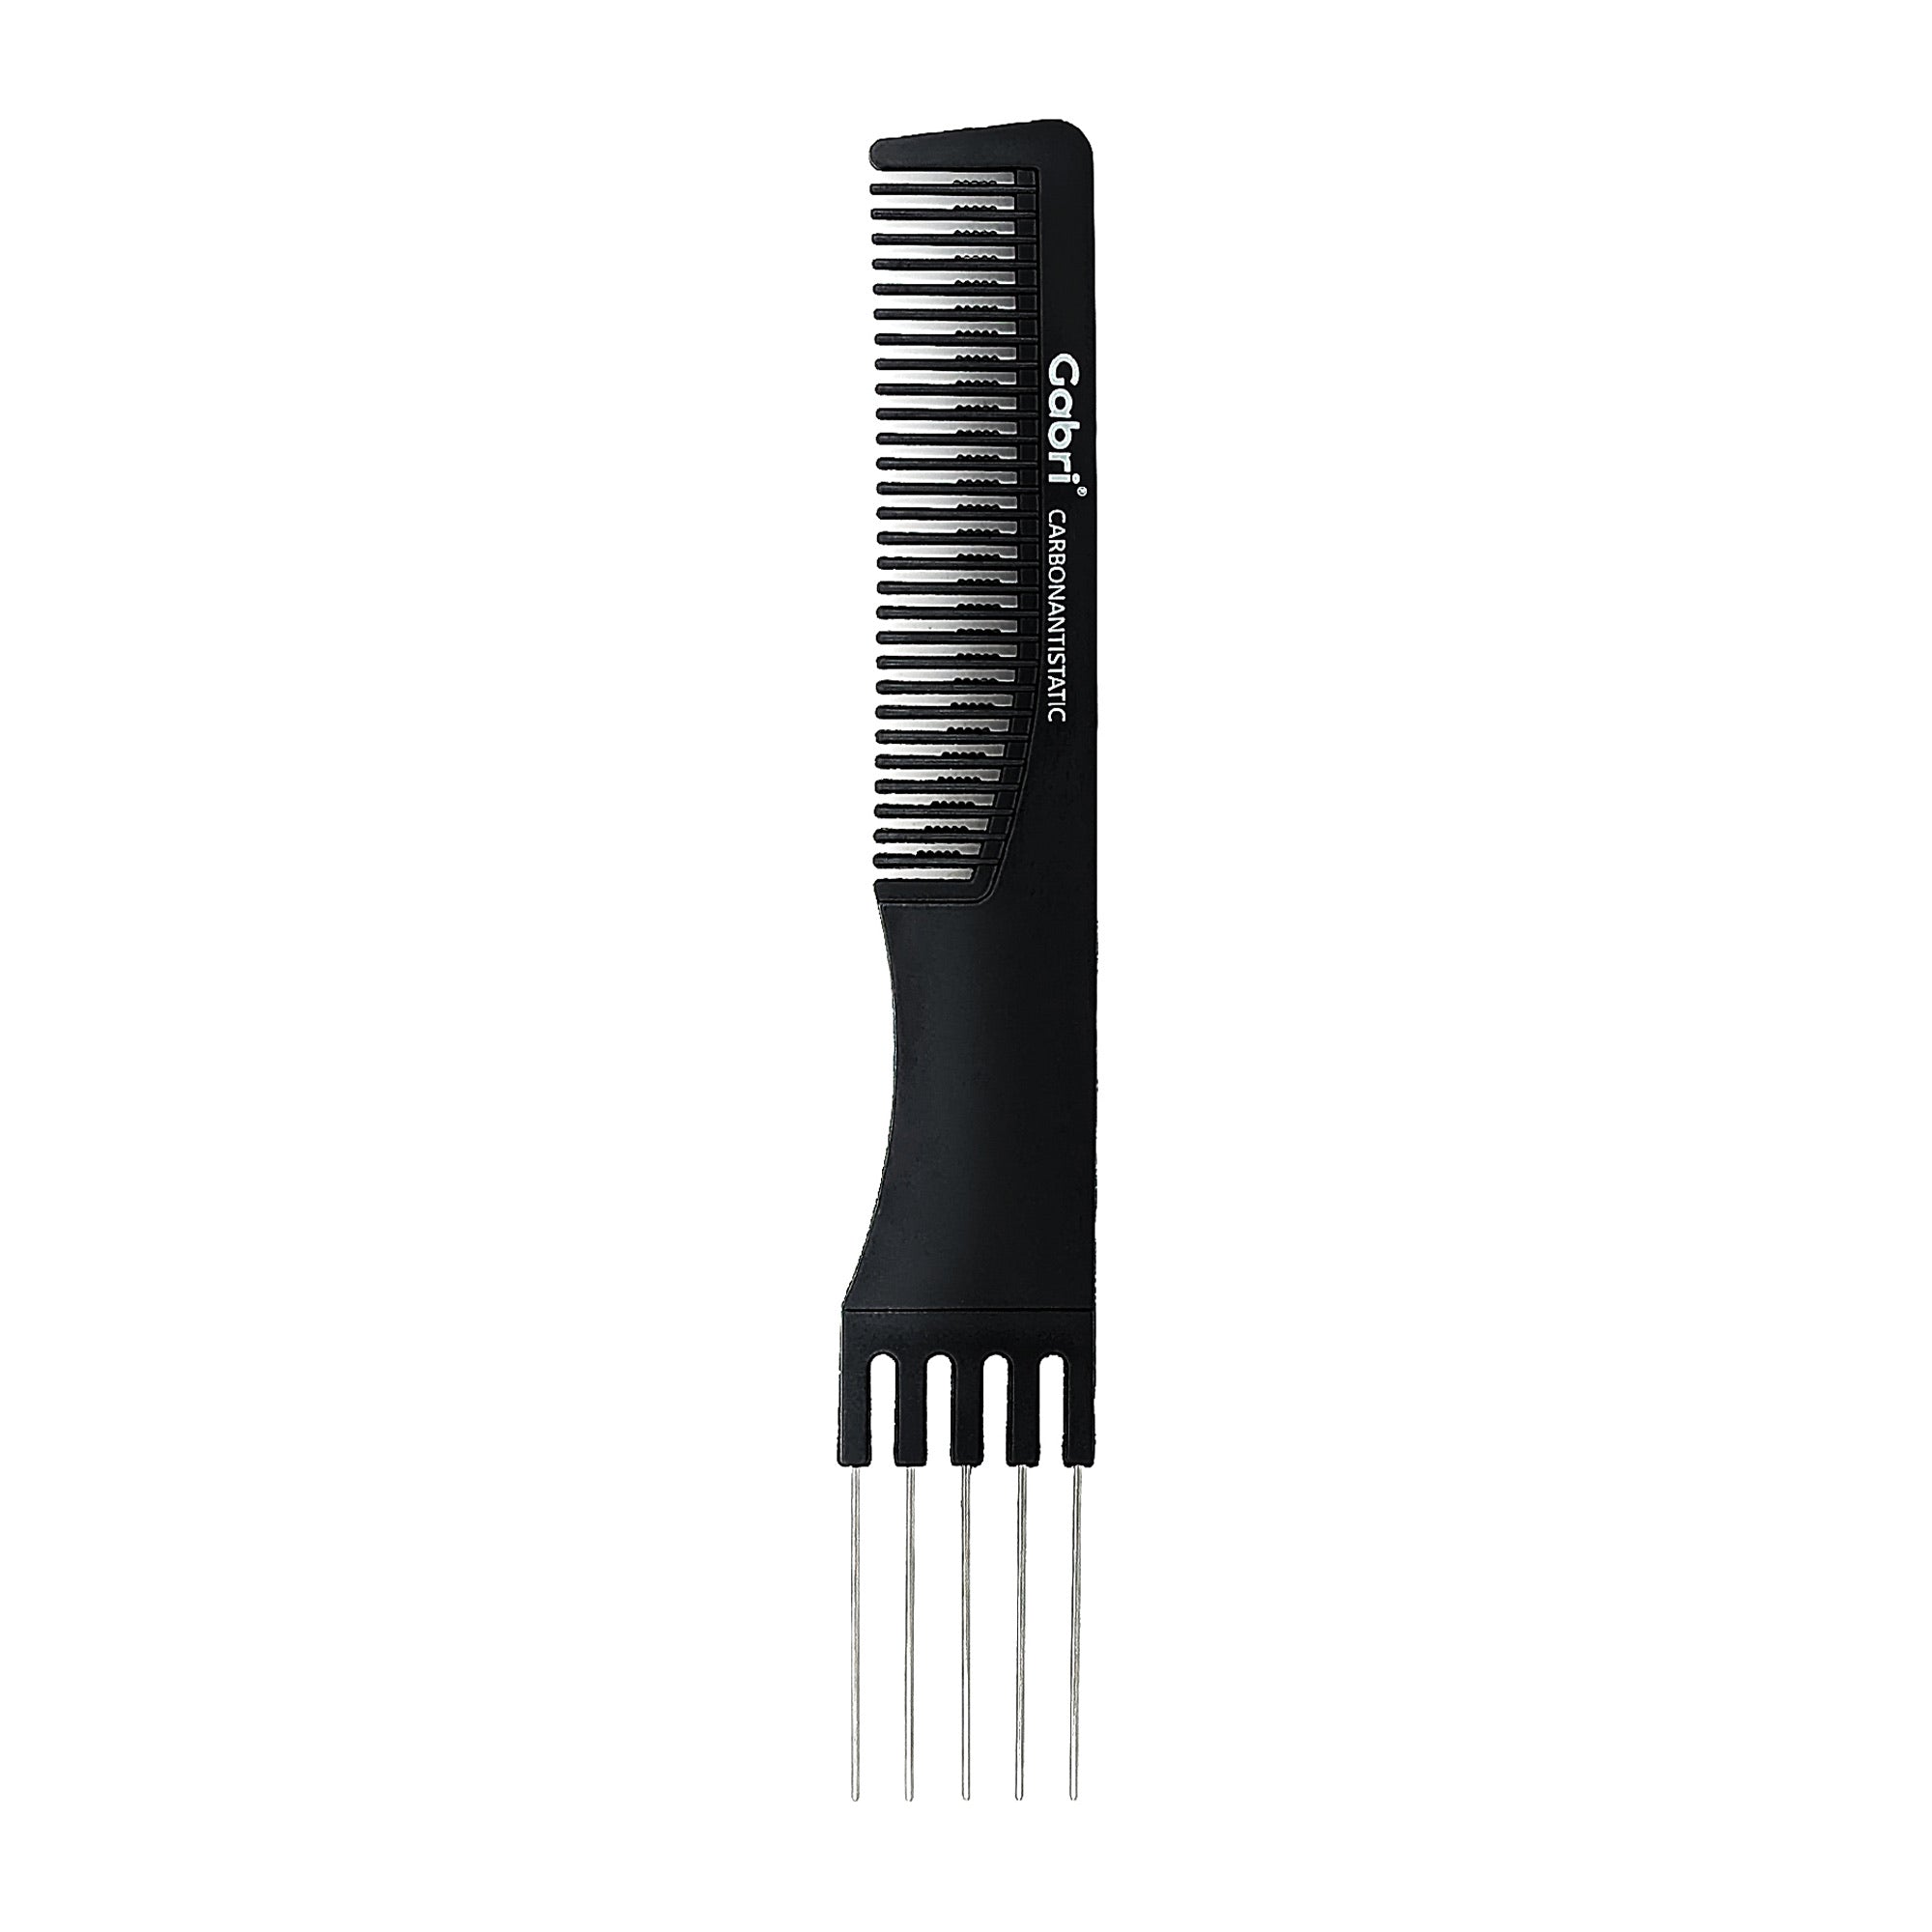 Gabri - Styling Comb 2in1 Sided Comb & Pin Lift No.26 19cm